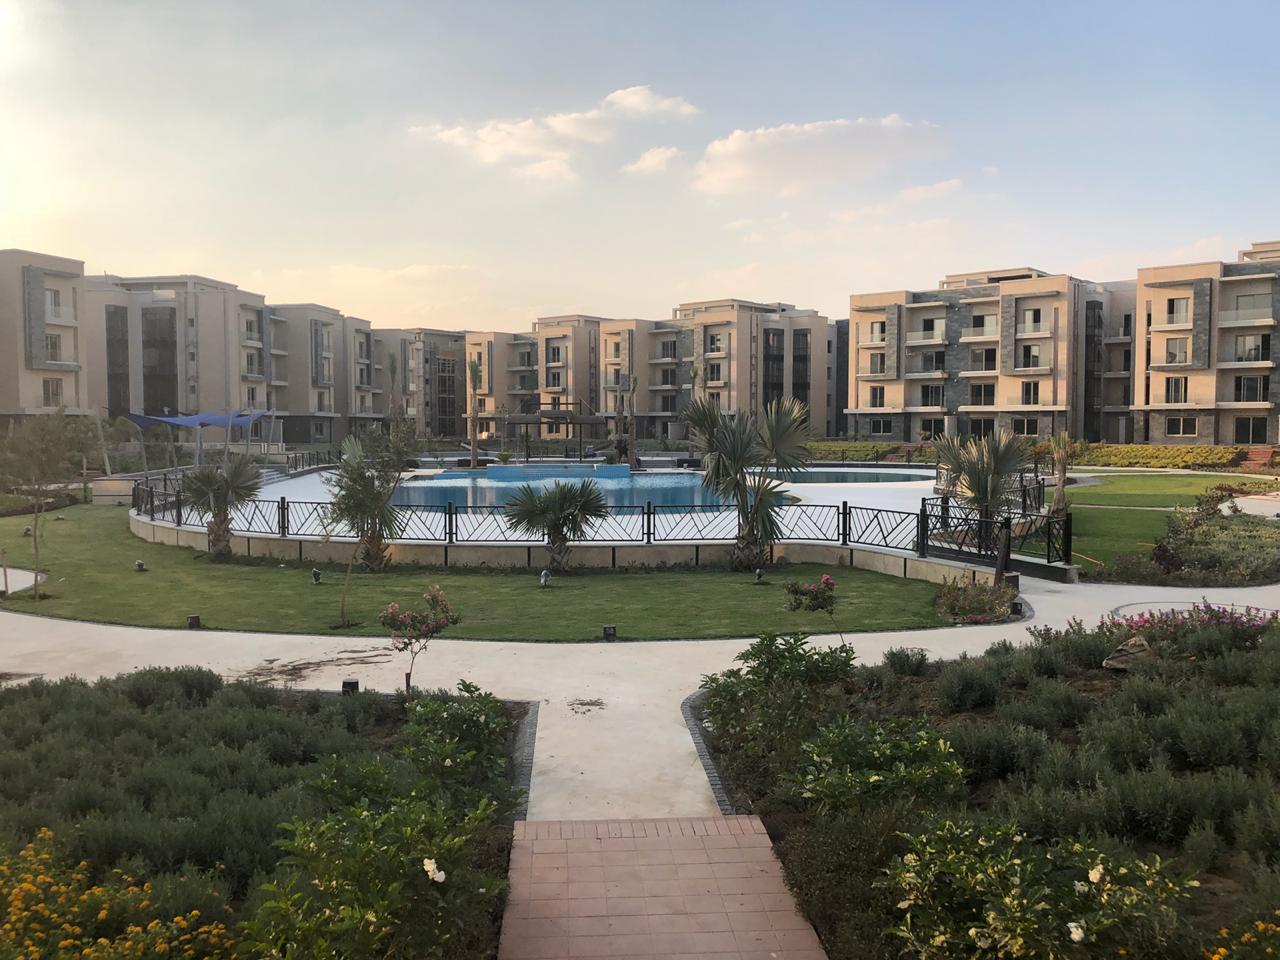 Apartments for sale in Galleria Moon Valley 165 m